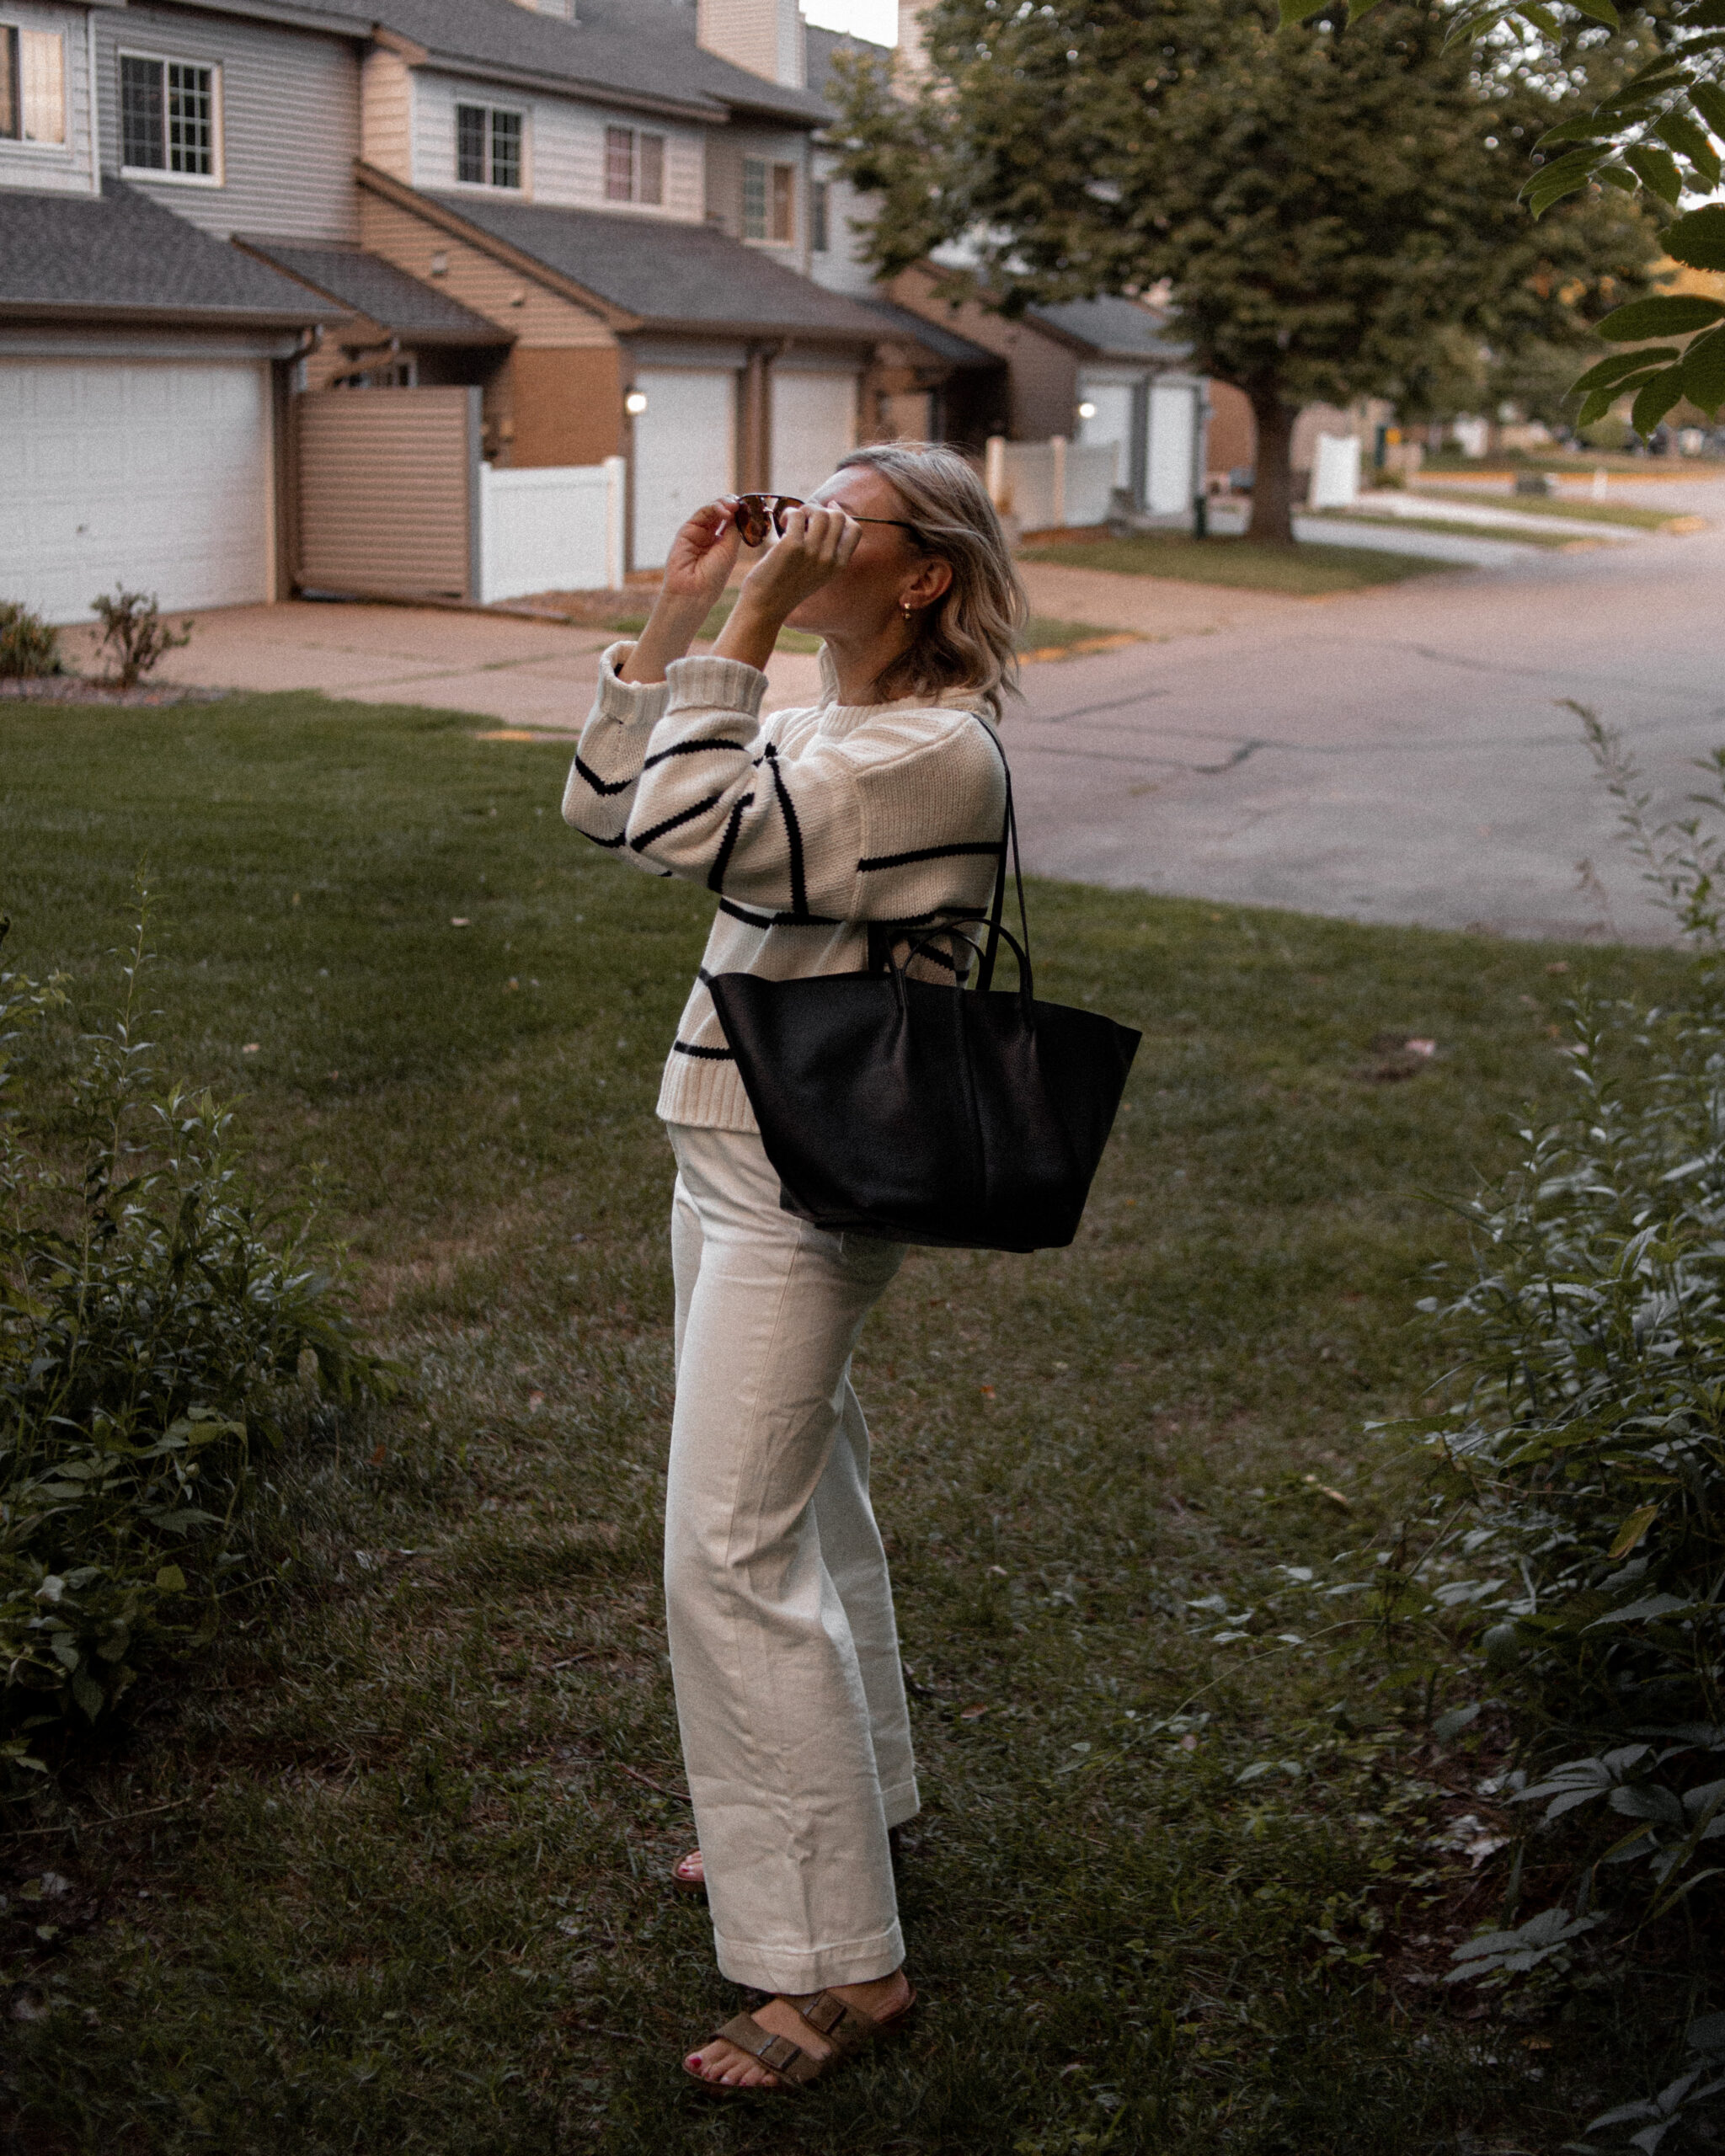 Karin Emily wears a jenni kayne striped sweater, white wide leg pants, birkenstock arizona sandals and a black bag from the Nordstrom Anniversary Sale